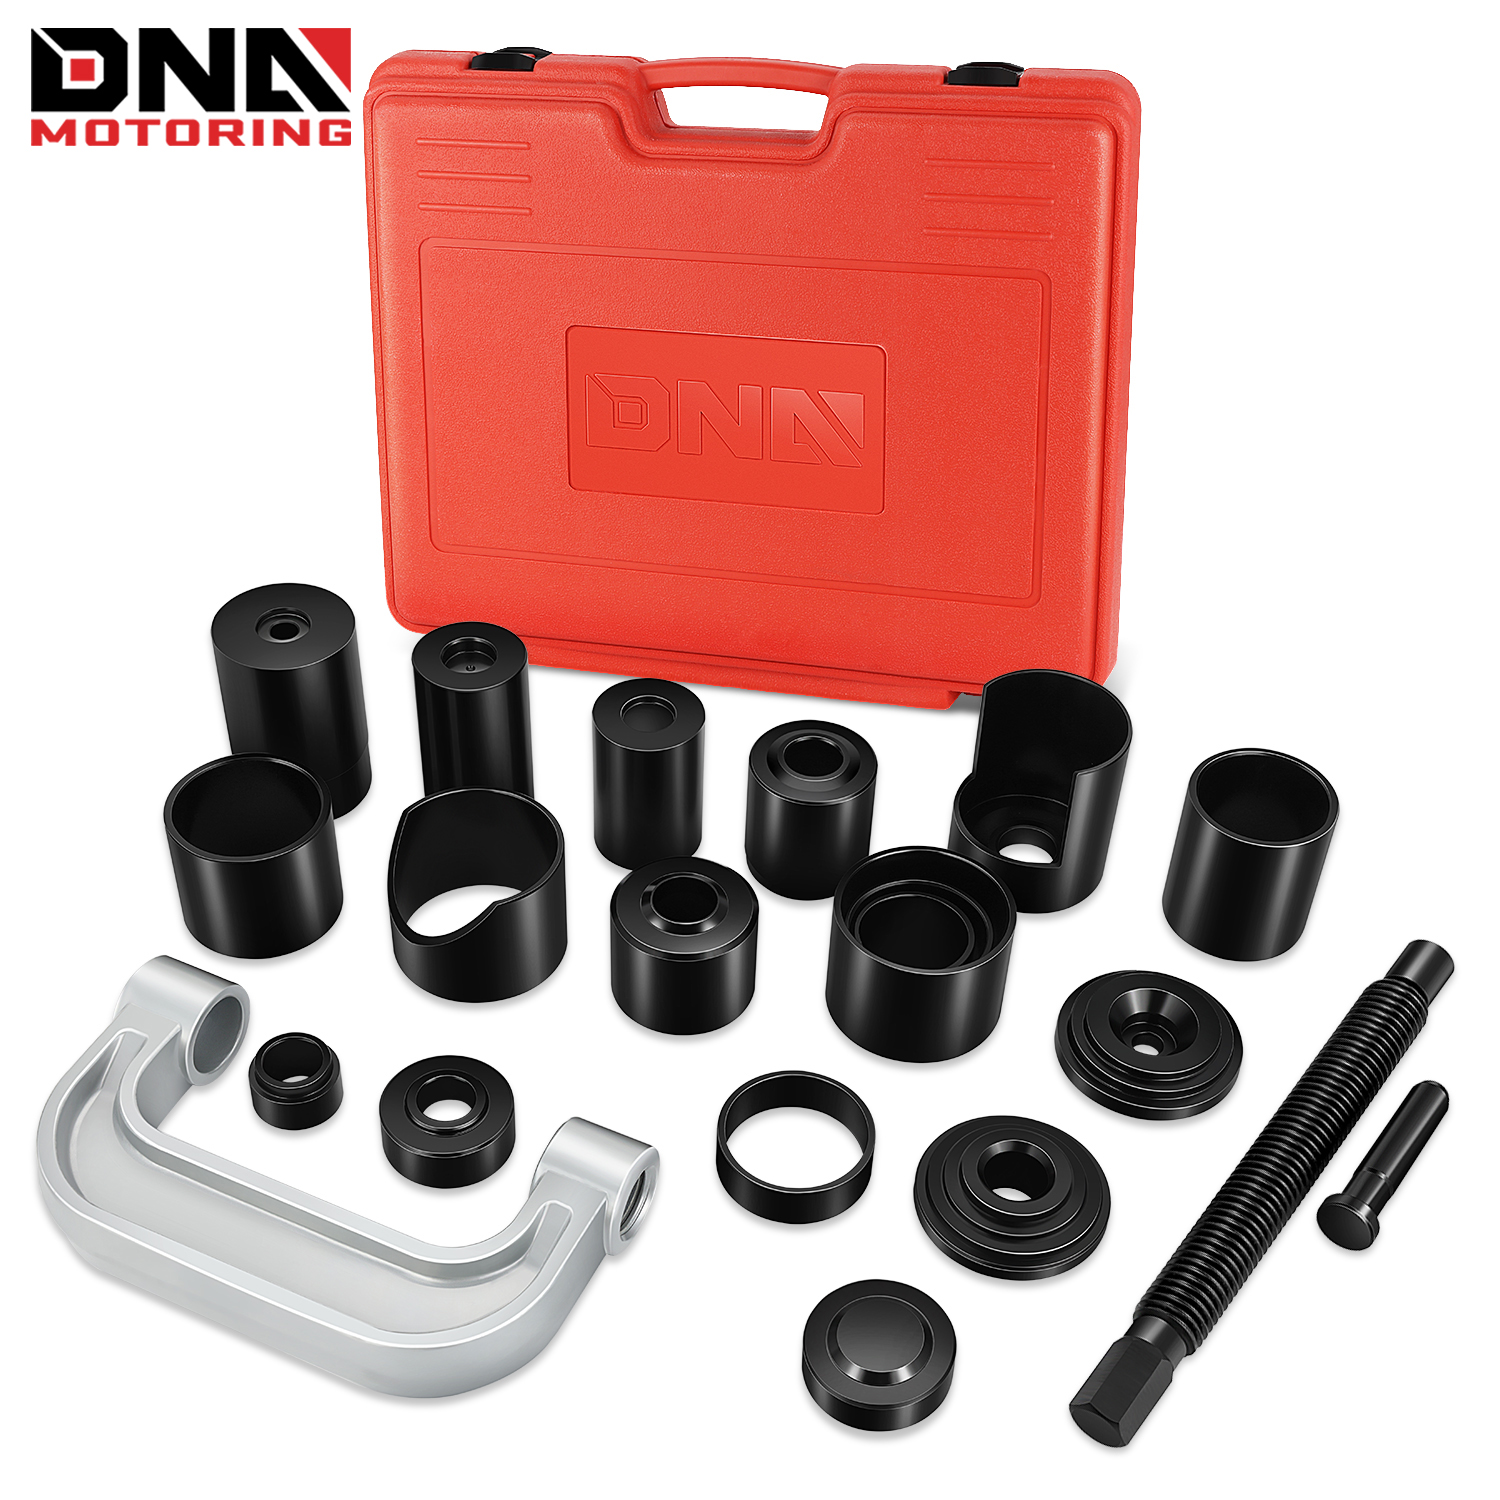 

21pcs Universal Ball Joint Service Repair Remover Installer Adapter Tool Kit For Most 2wd 4wd Cars Pickups Suvs